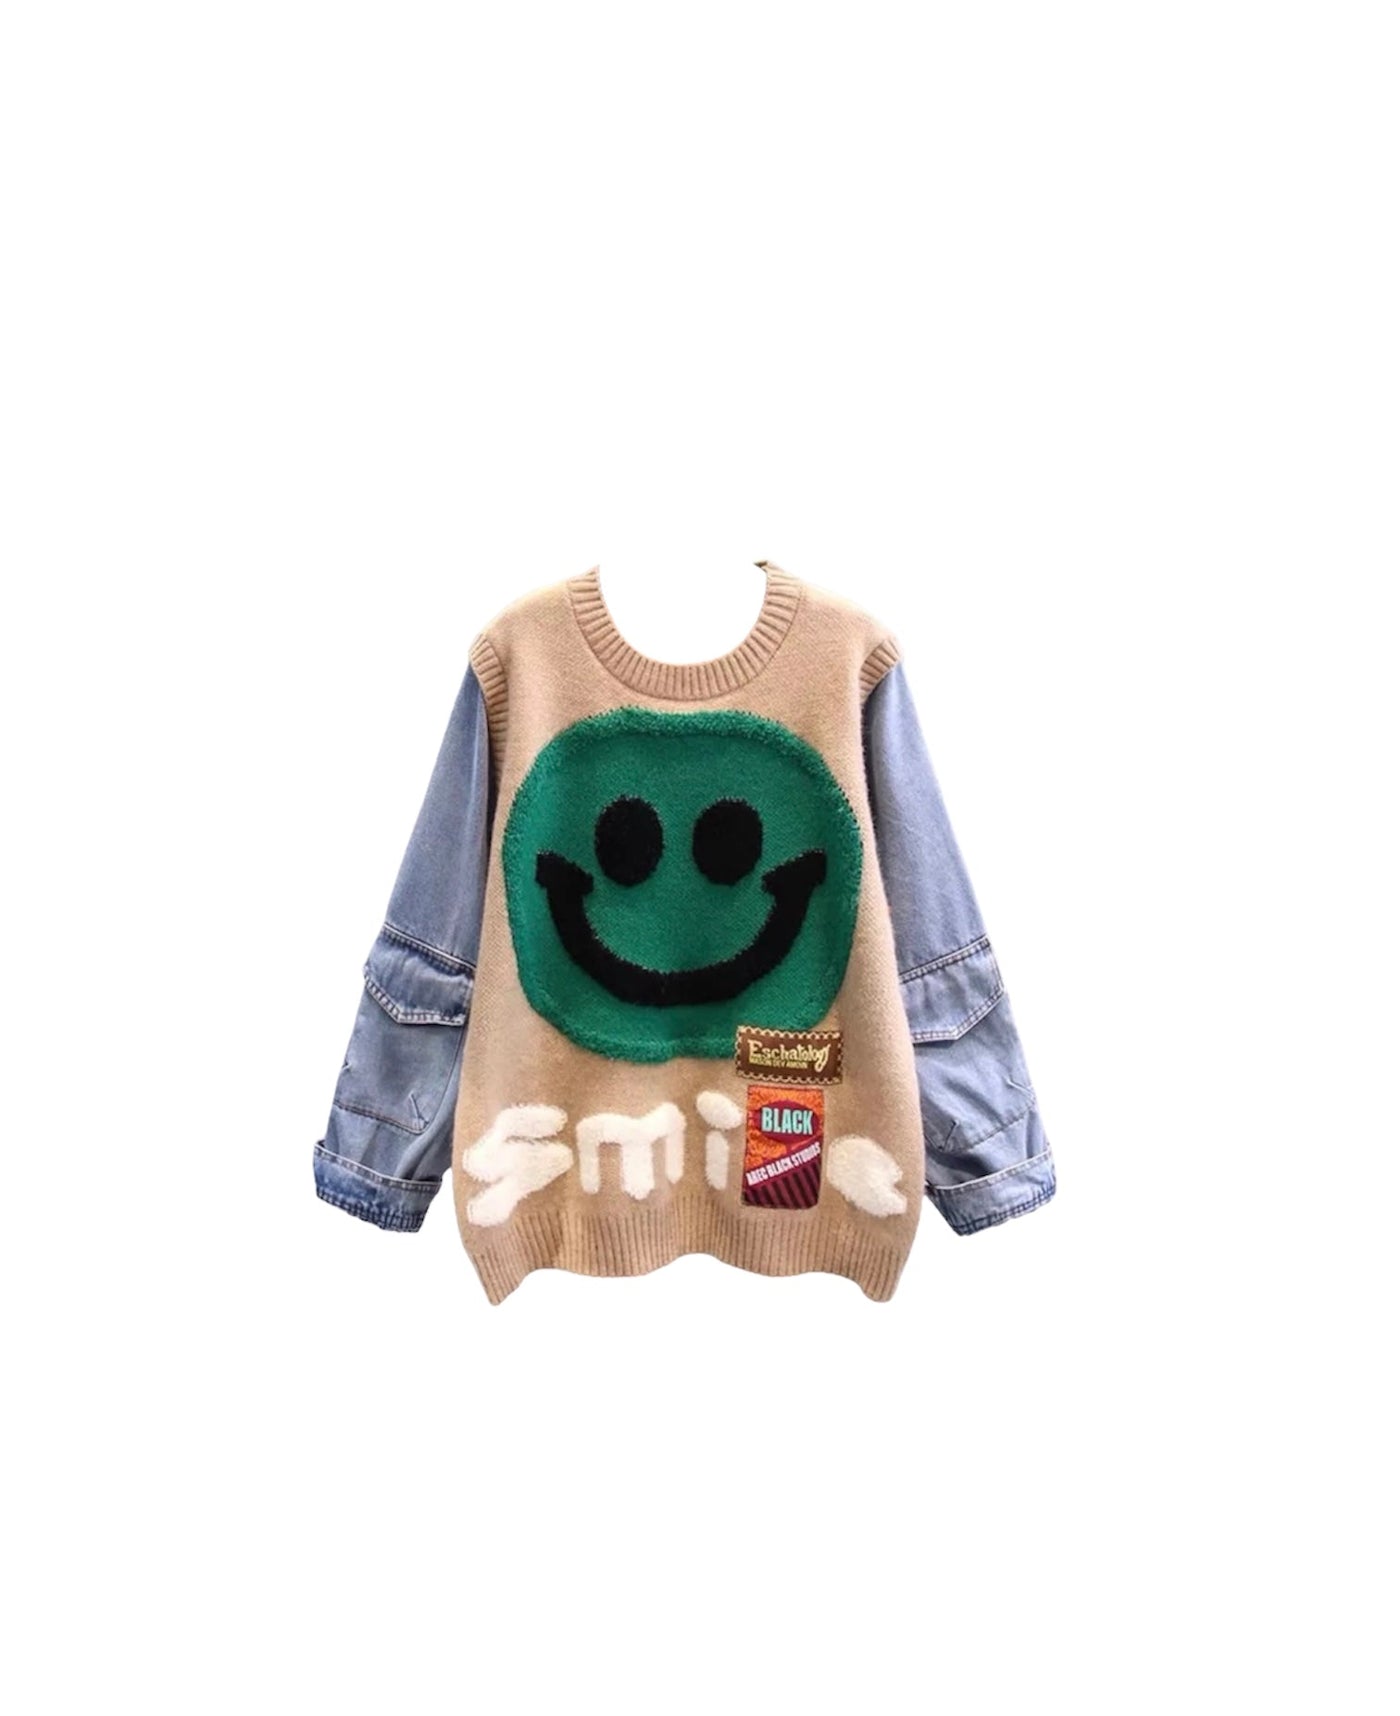 Just Smile Oversize Sweater - Dezired Beauty Boutique